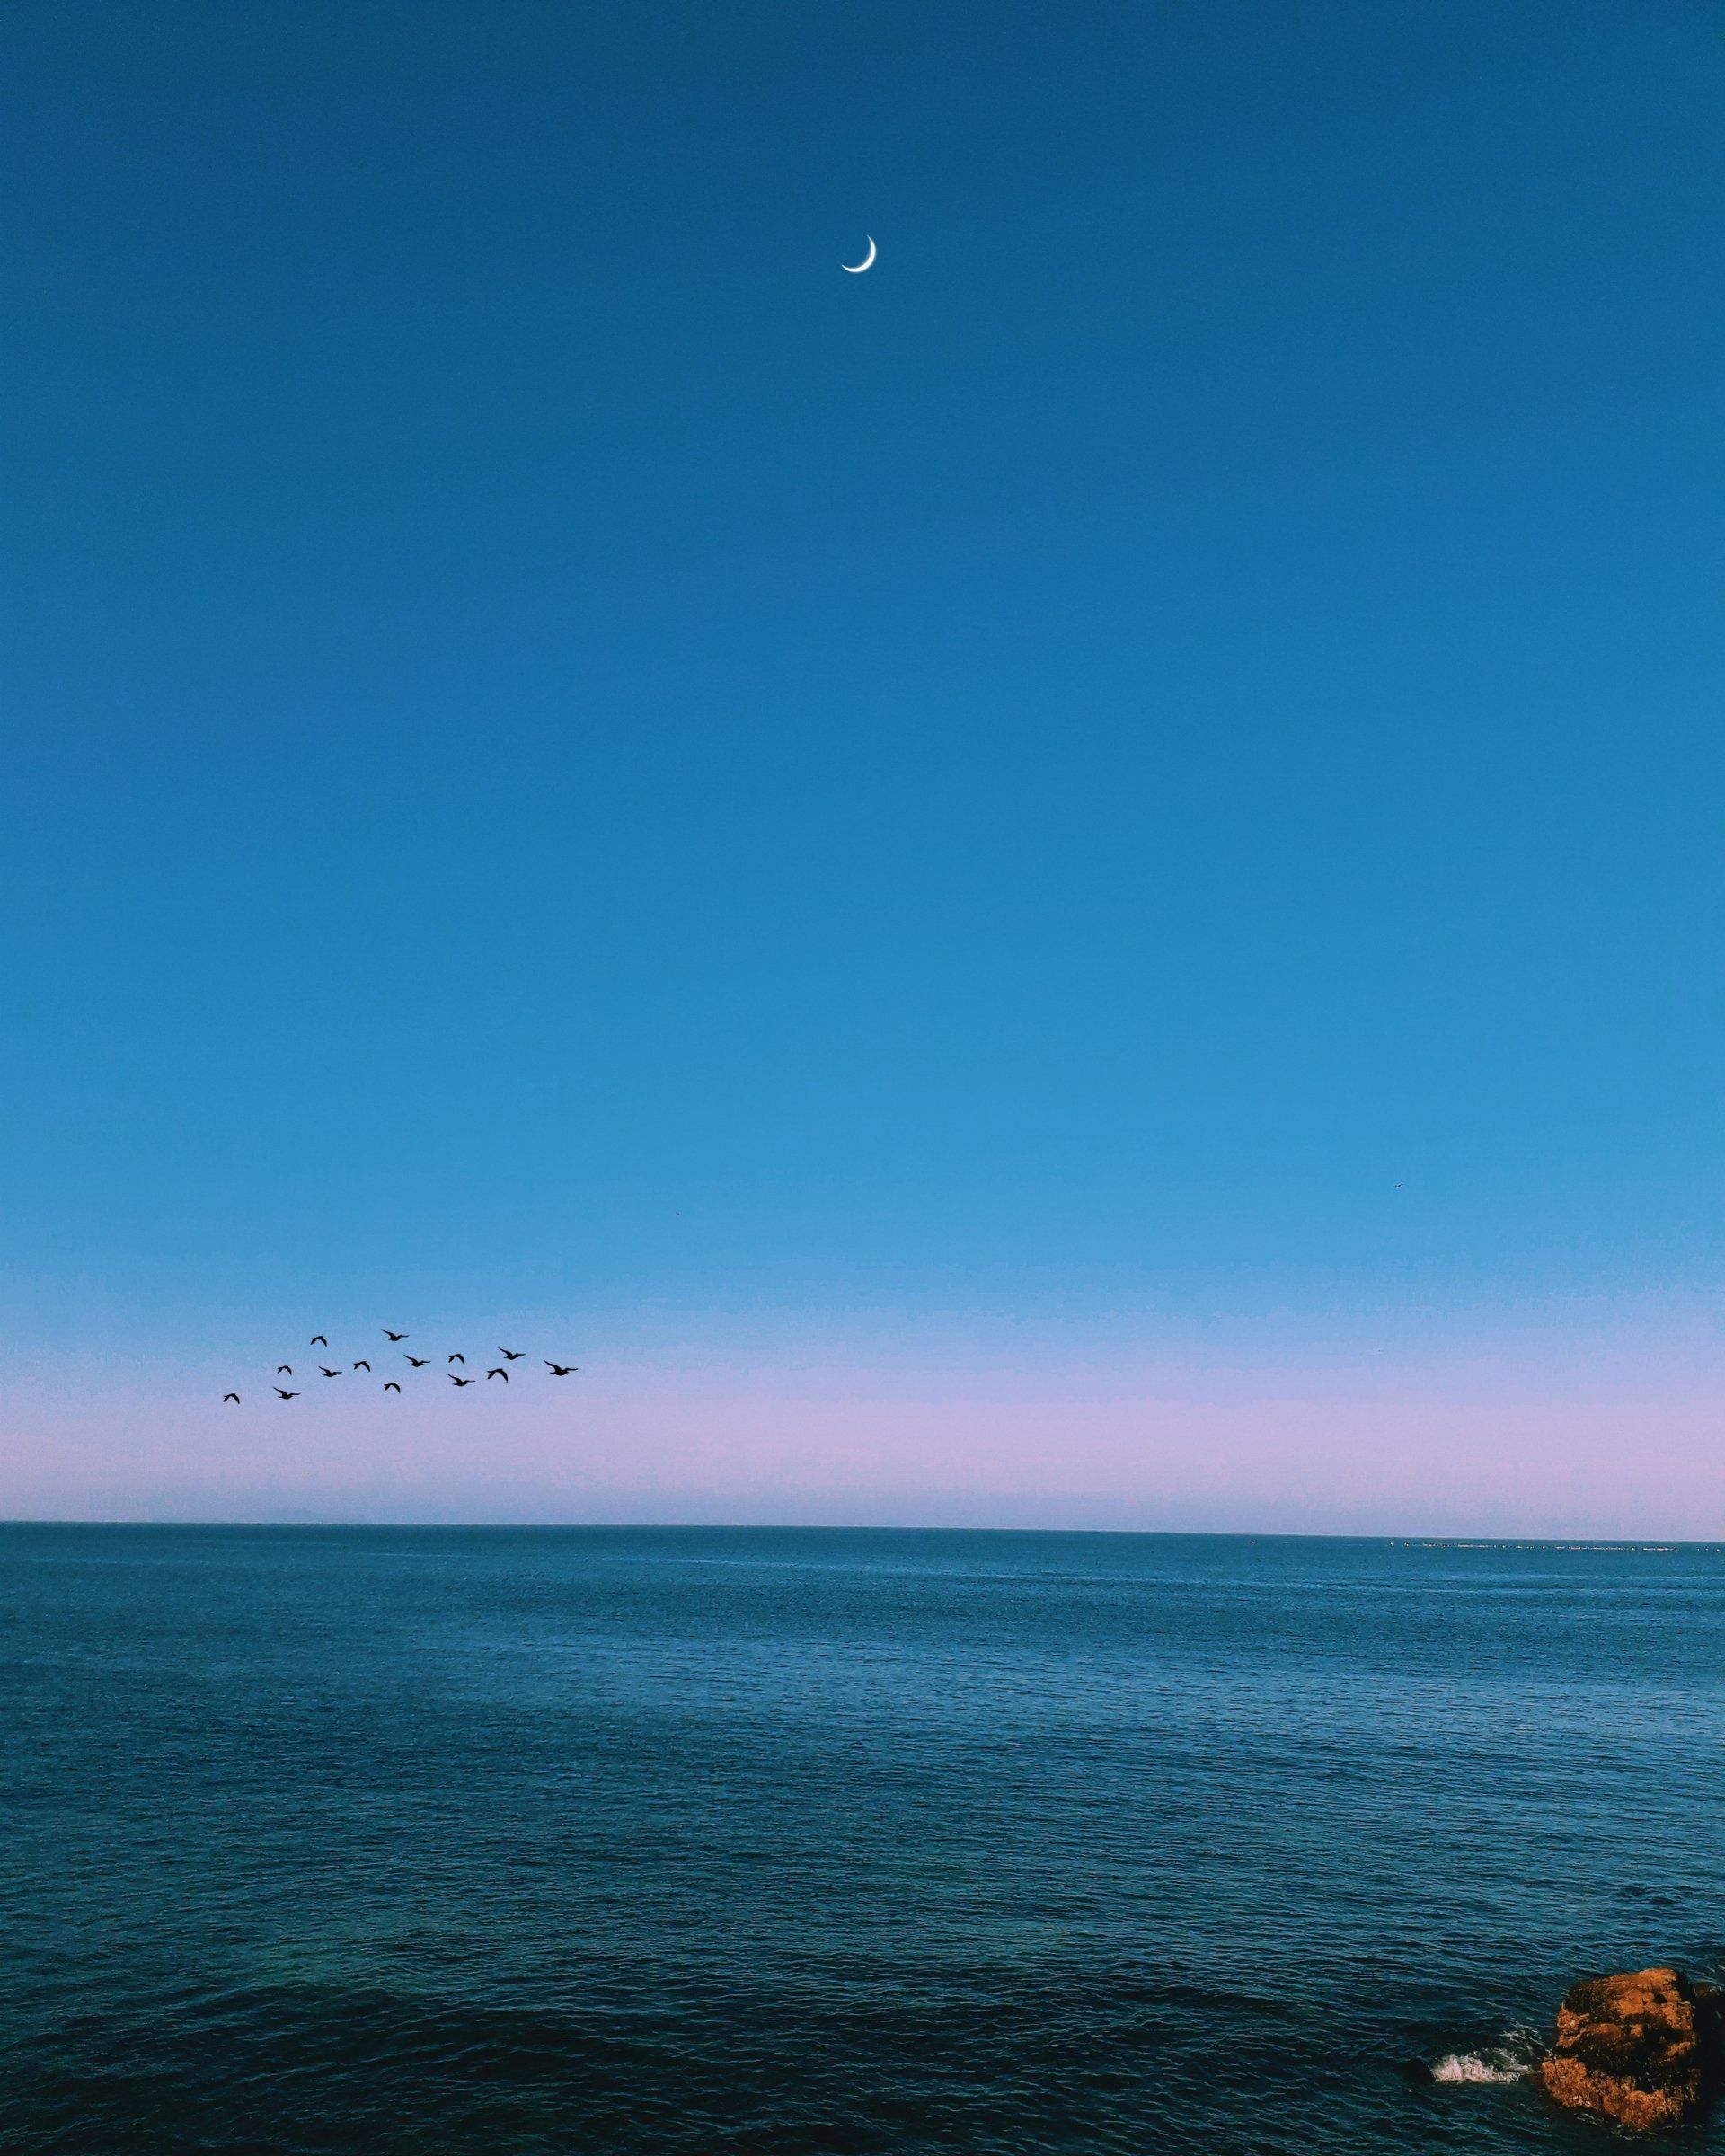 a flock of birds flying over the ocean with a crescent moon in the sky .